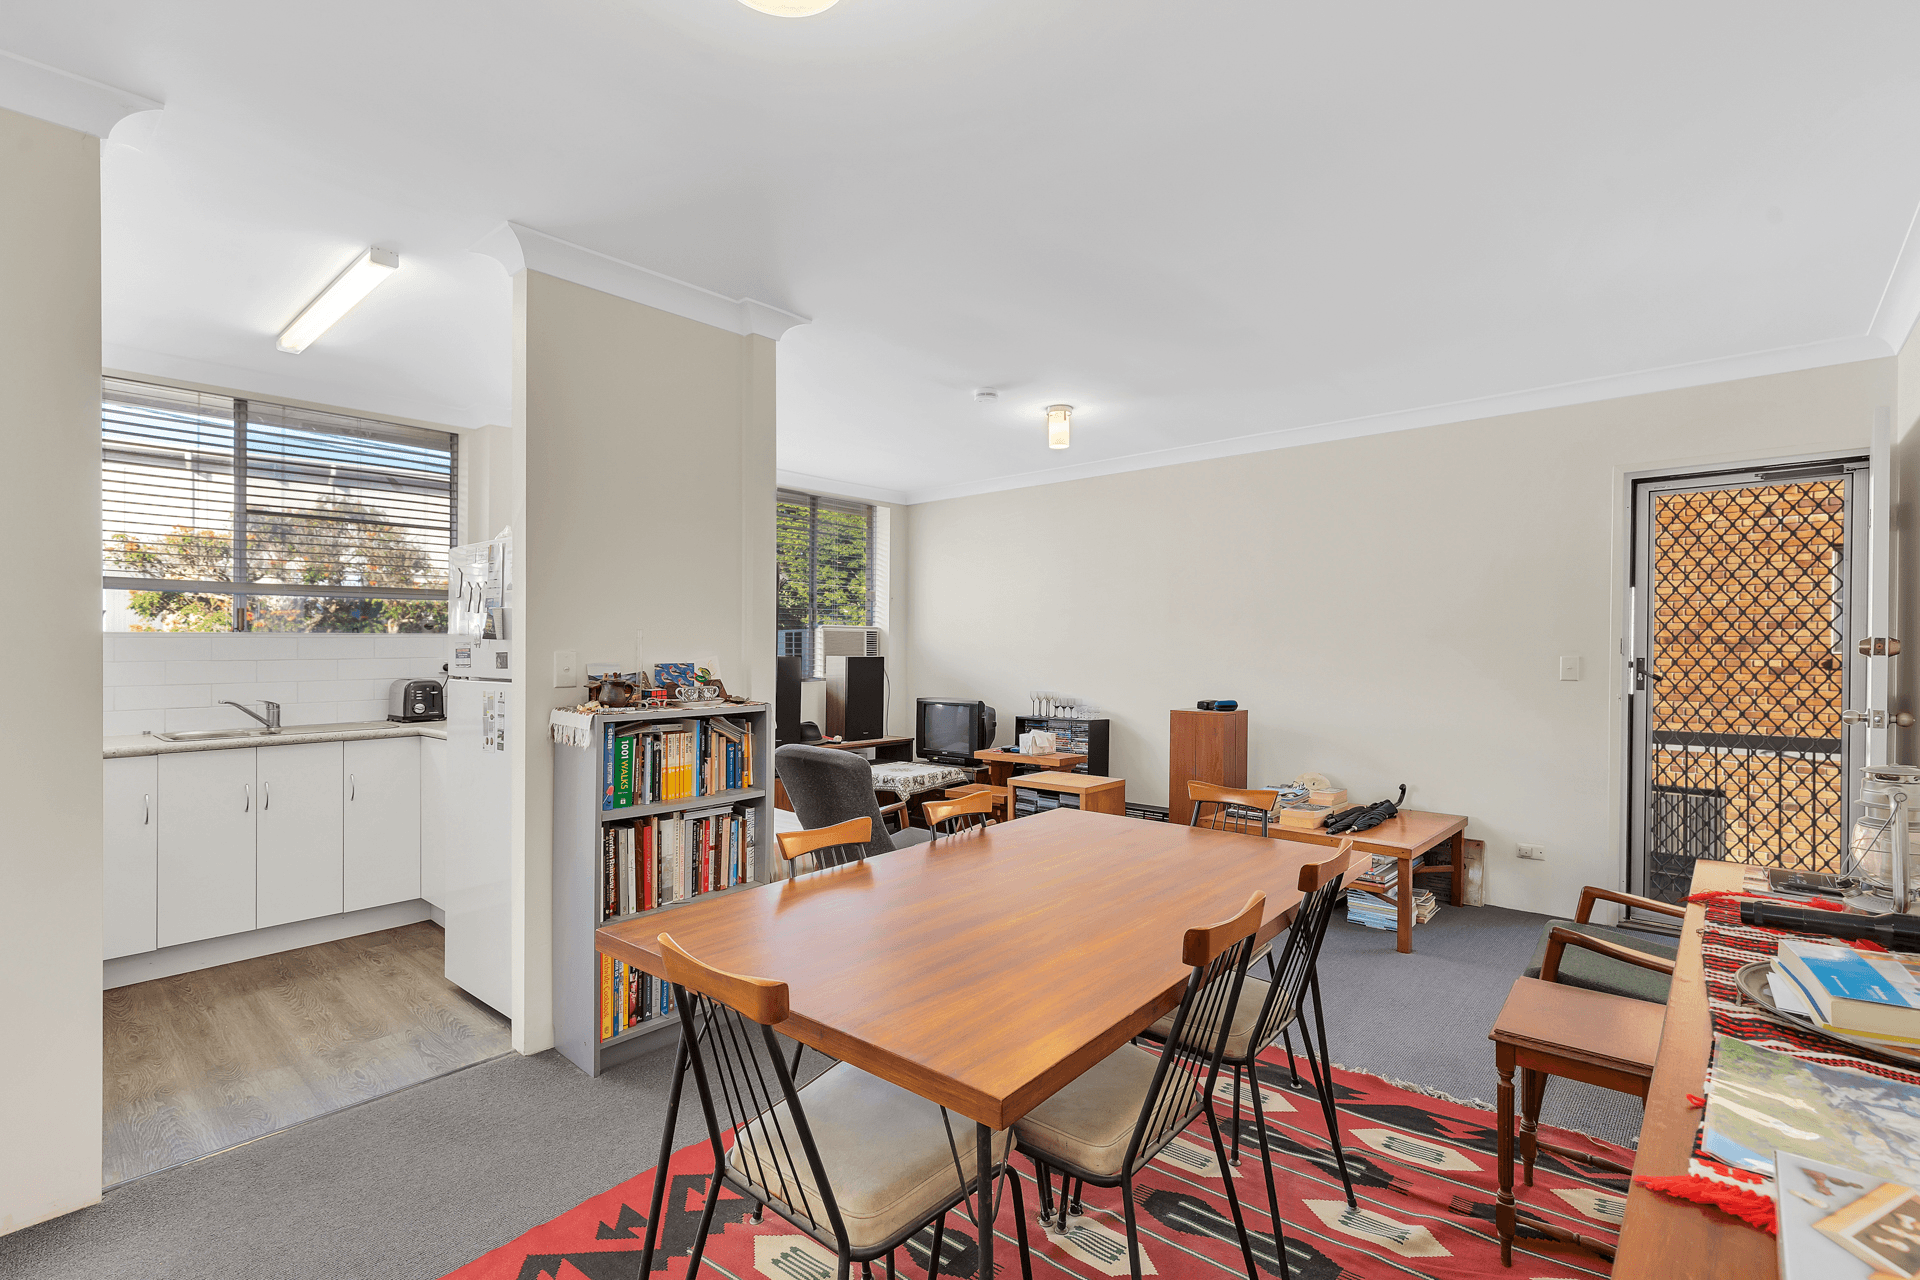 3/91 Central Avenue, INDOOROOPILLY, QLD 4068